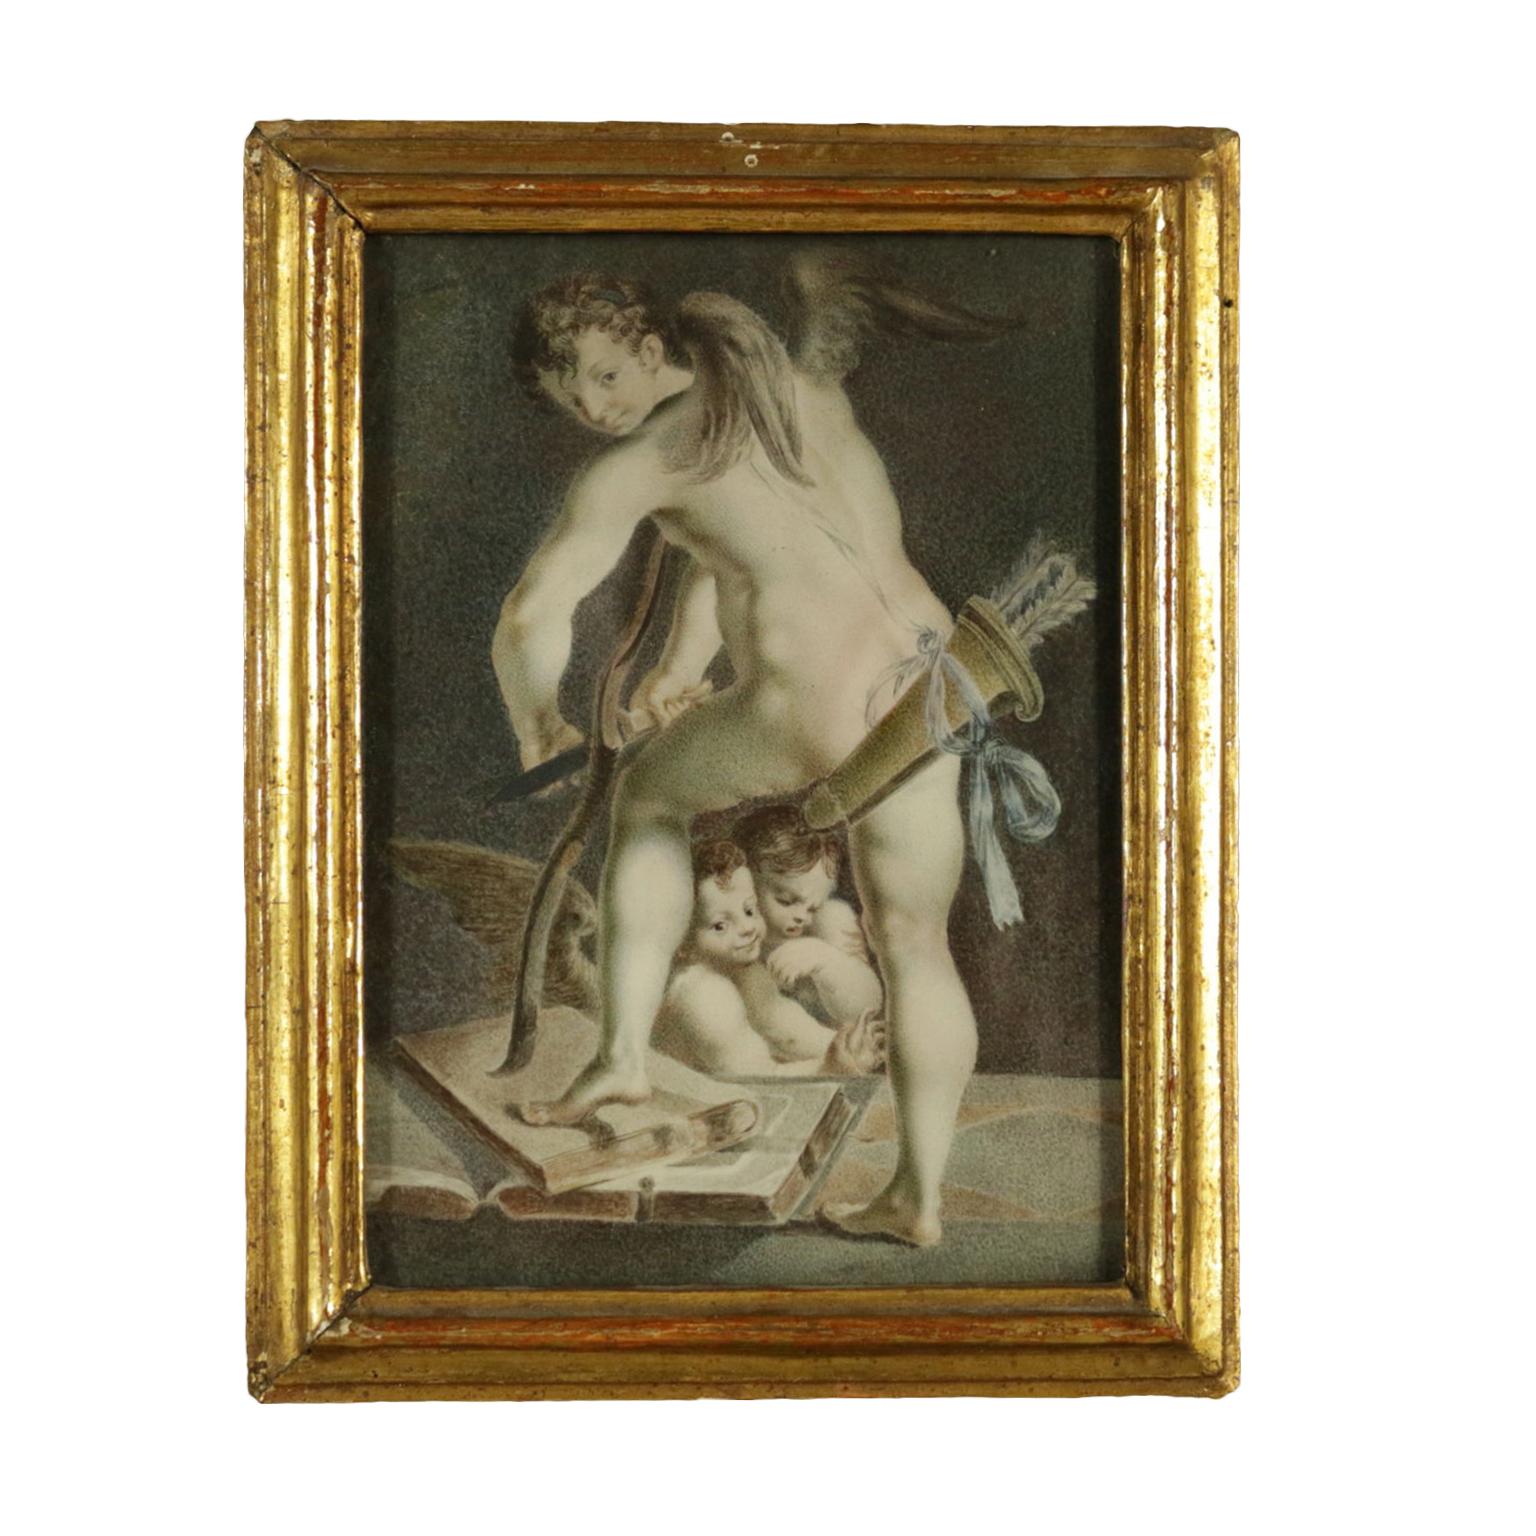 Unknown Figurative Painting - Cupid Building a Bow, Painting on Parchment Paper, 1765